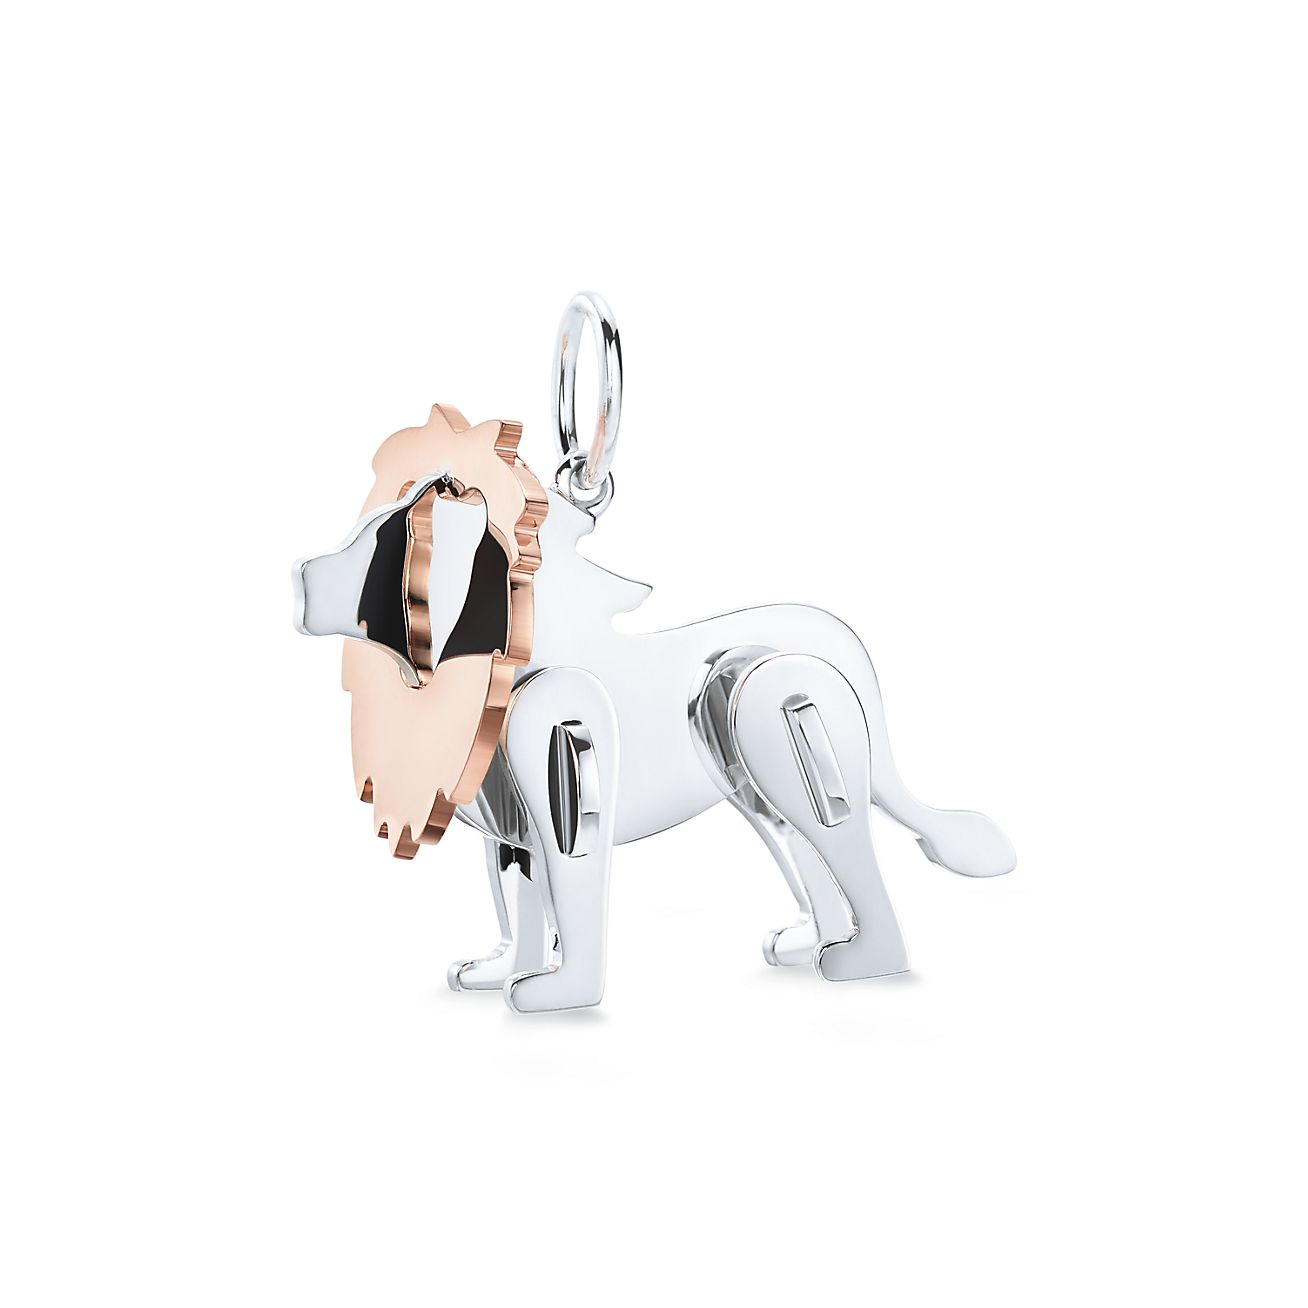 Tiffany Save the Wild Lion Charm in 